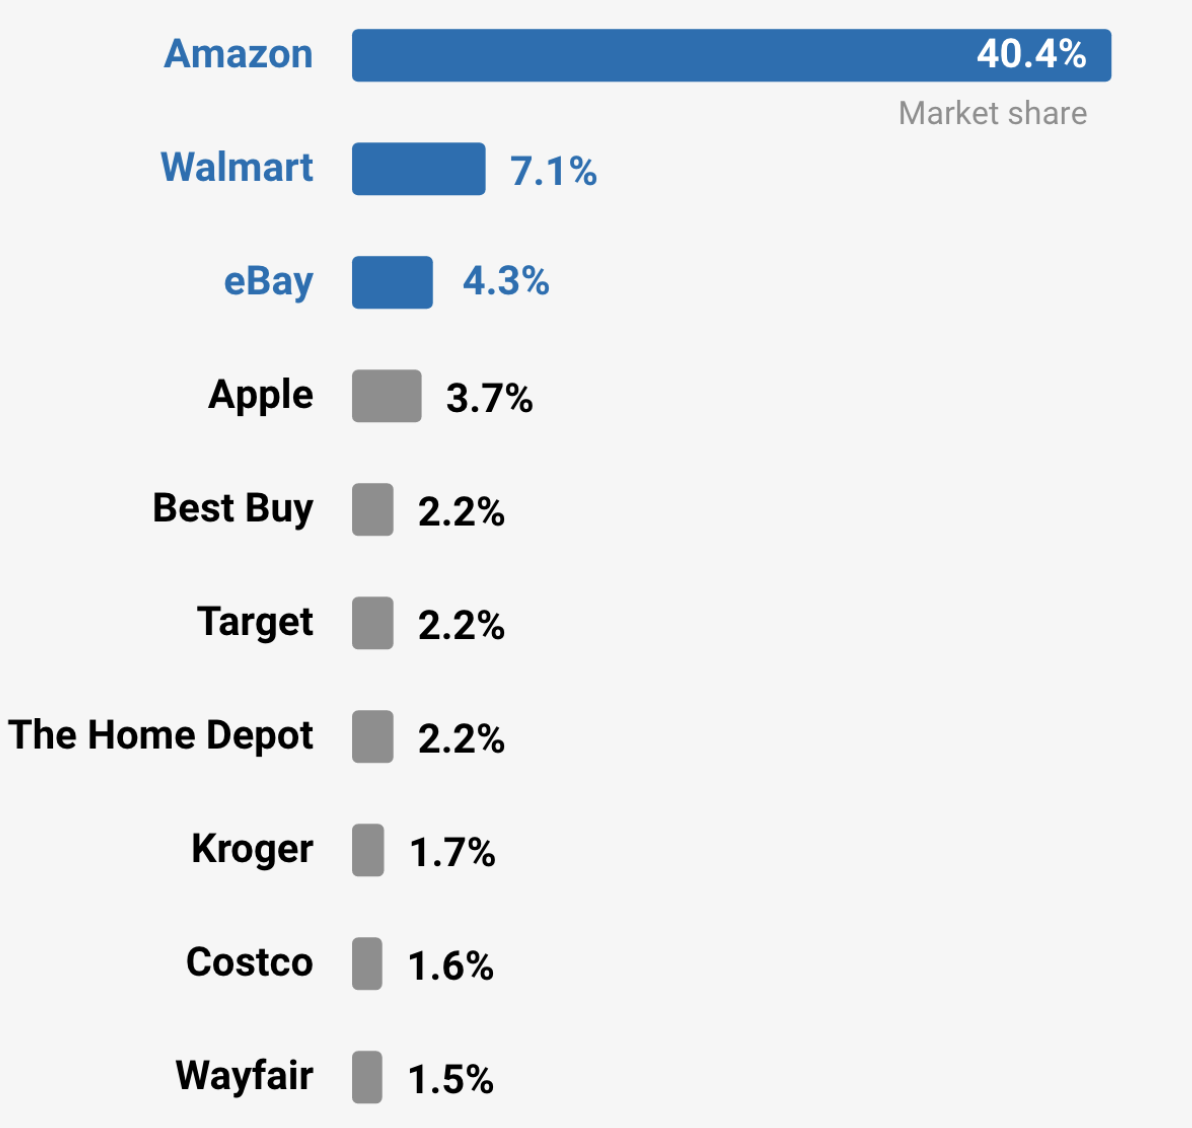 Amazon holds over 40% of market share 